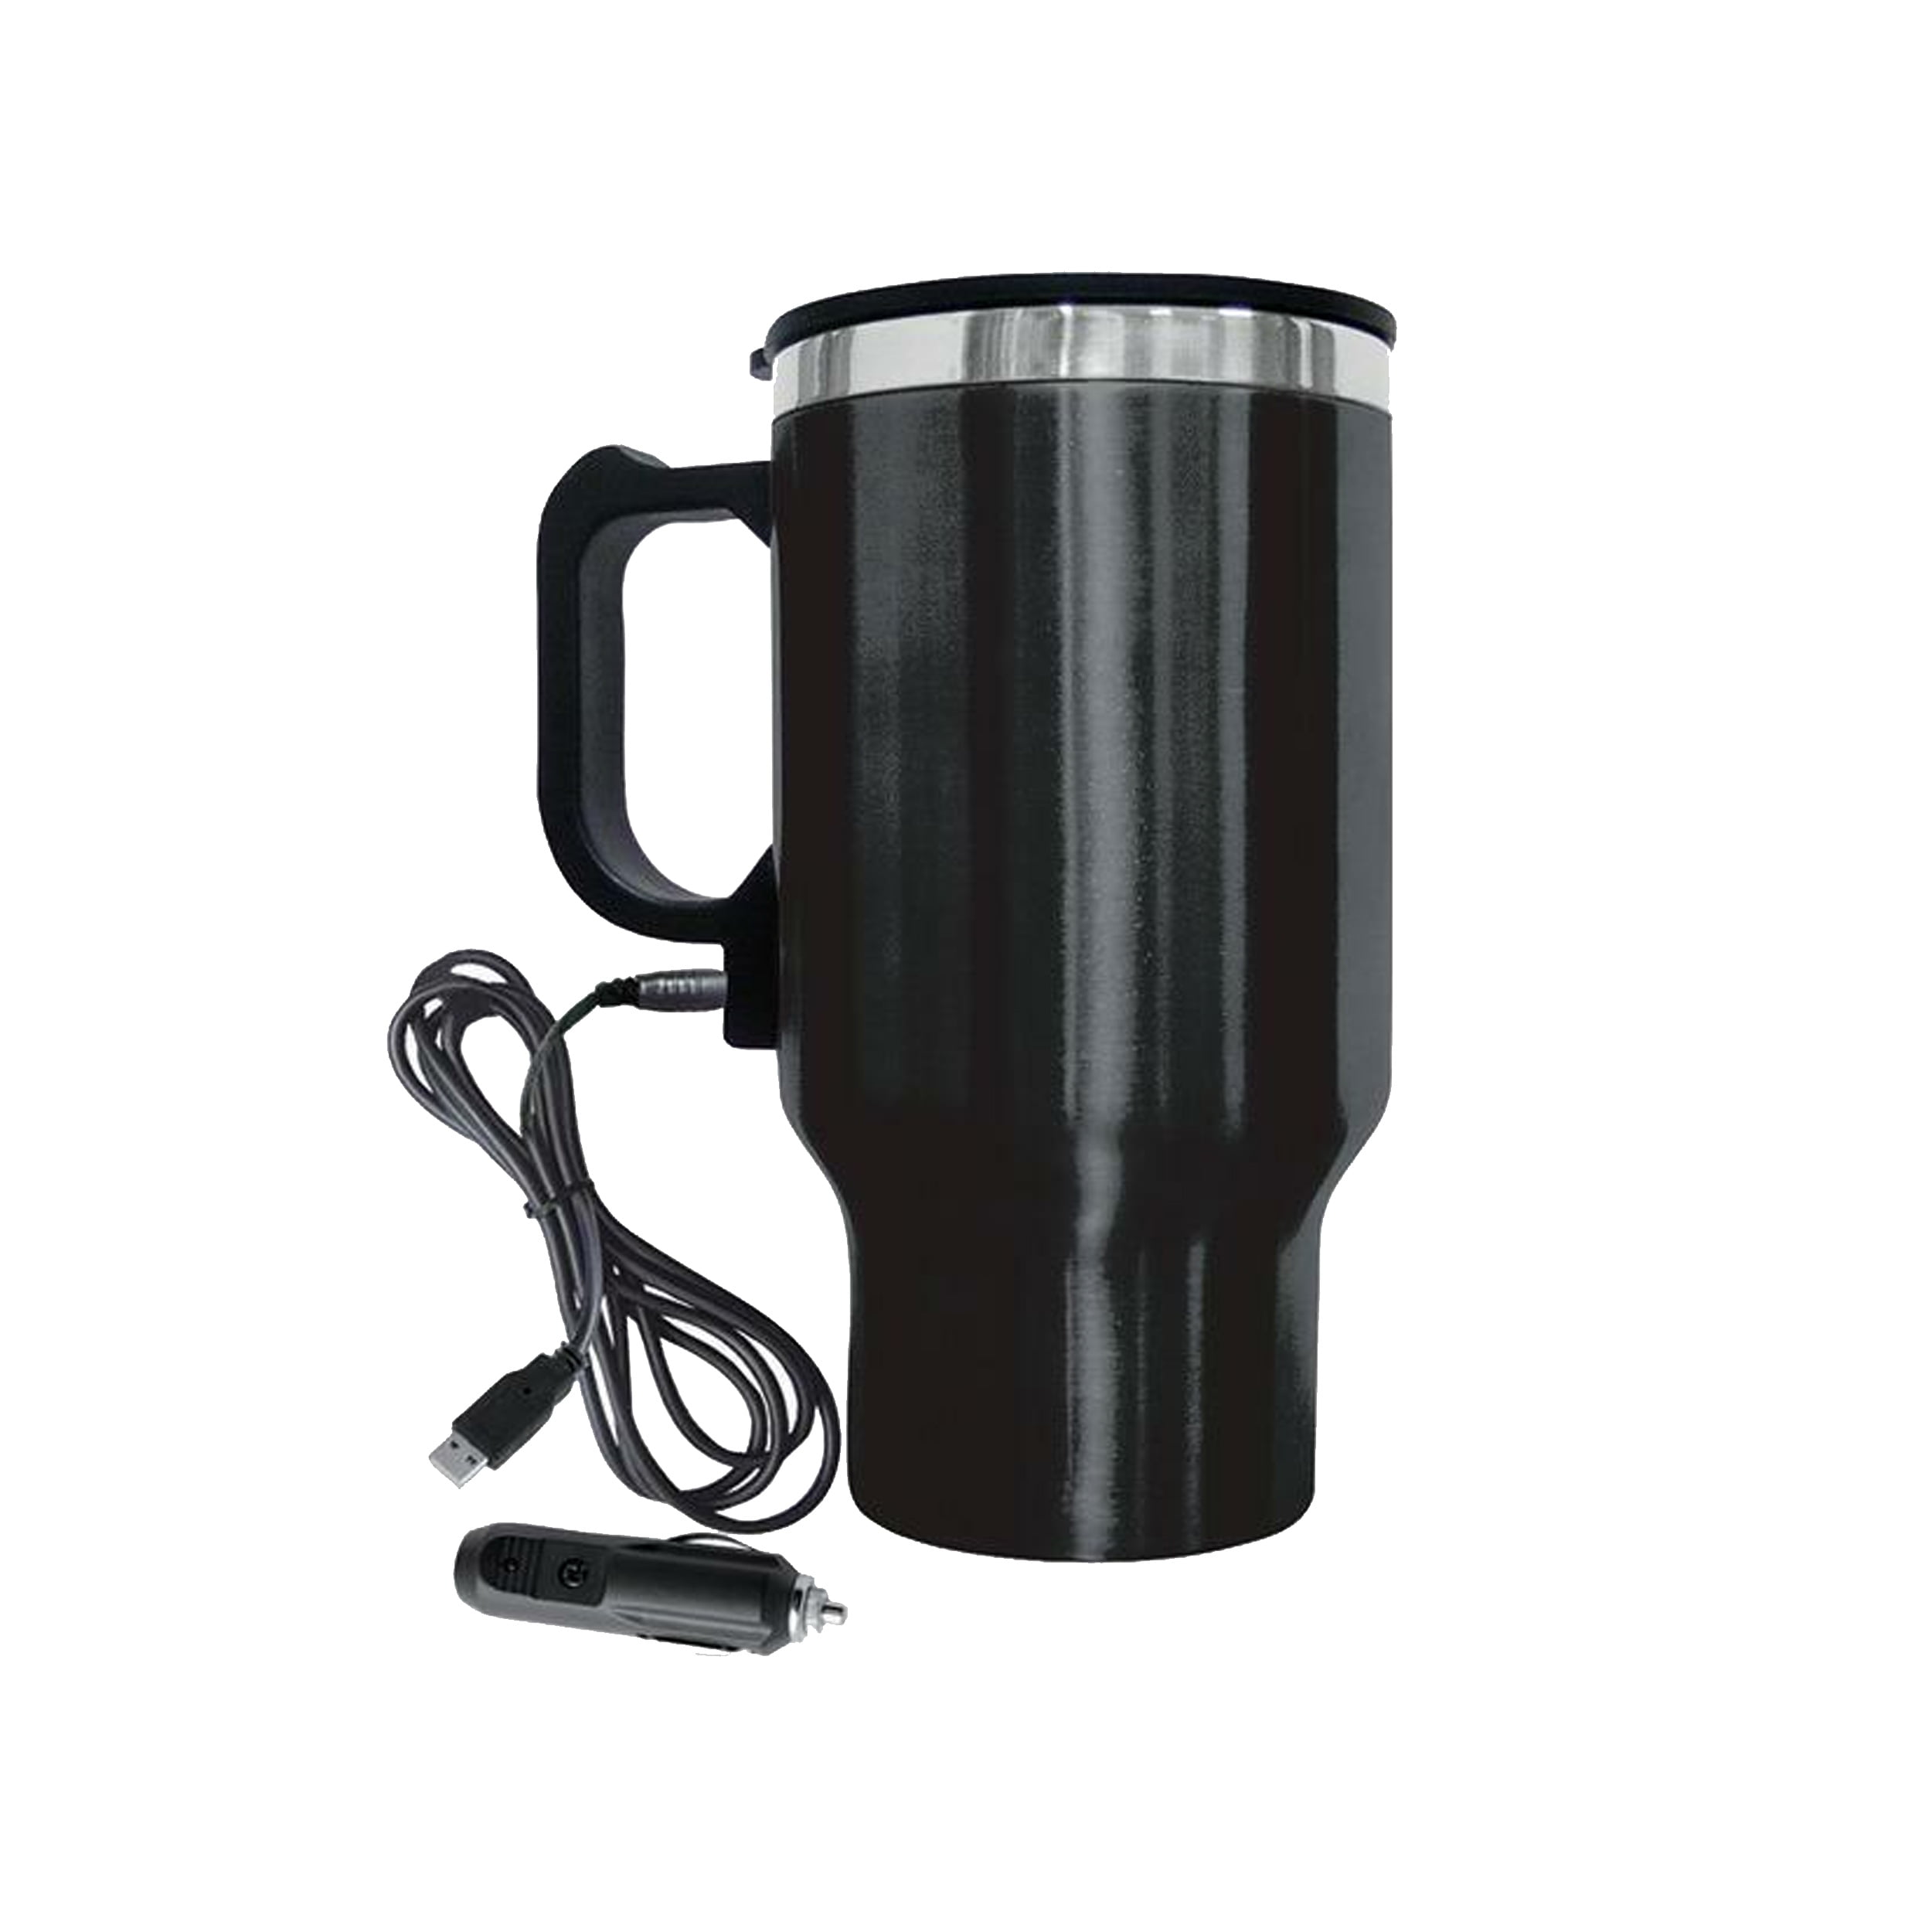 Details about   Travel 12V Car Thermos Thermal Heating Mug Cup Kettle Adapter Heated Auto L0M5 